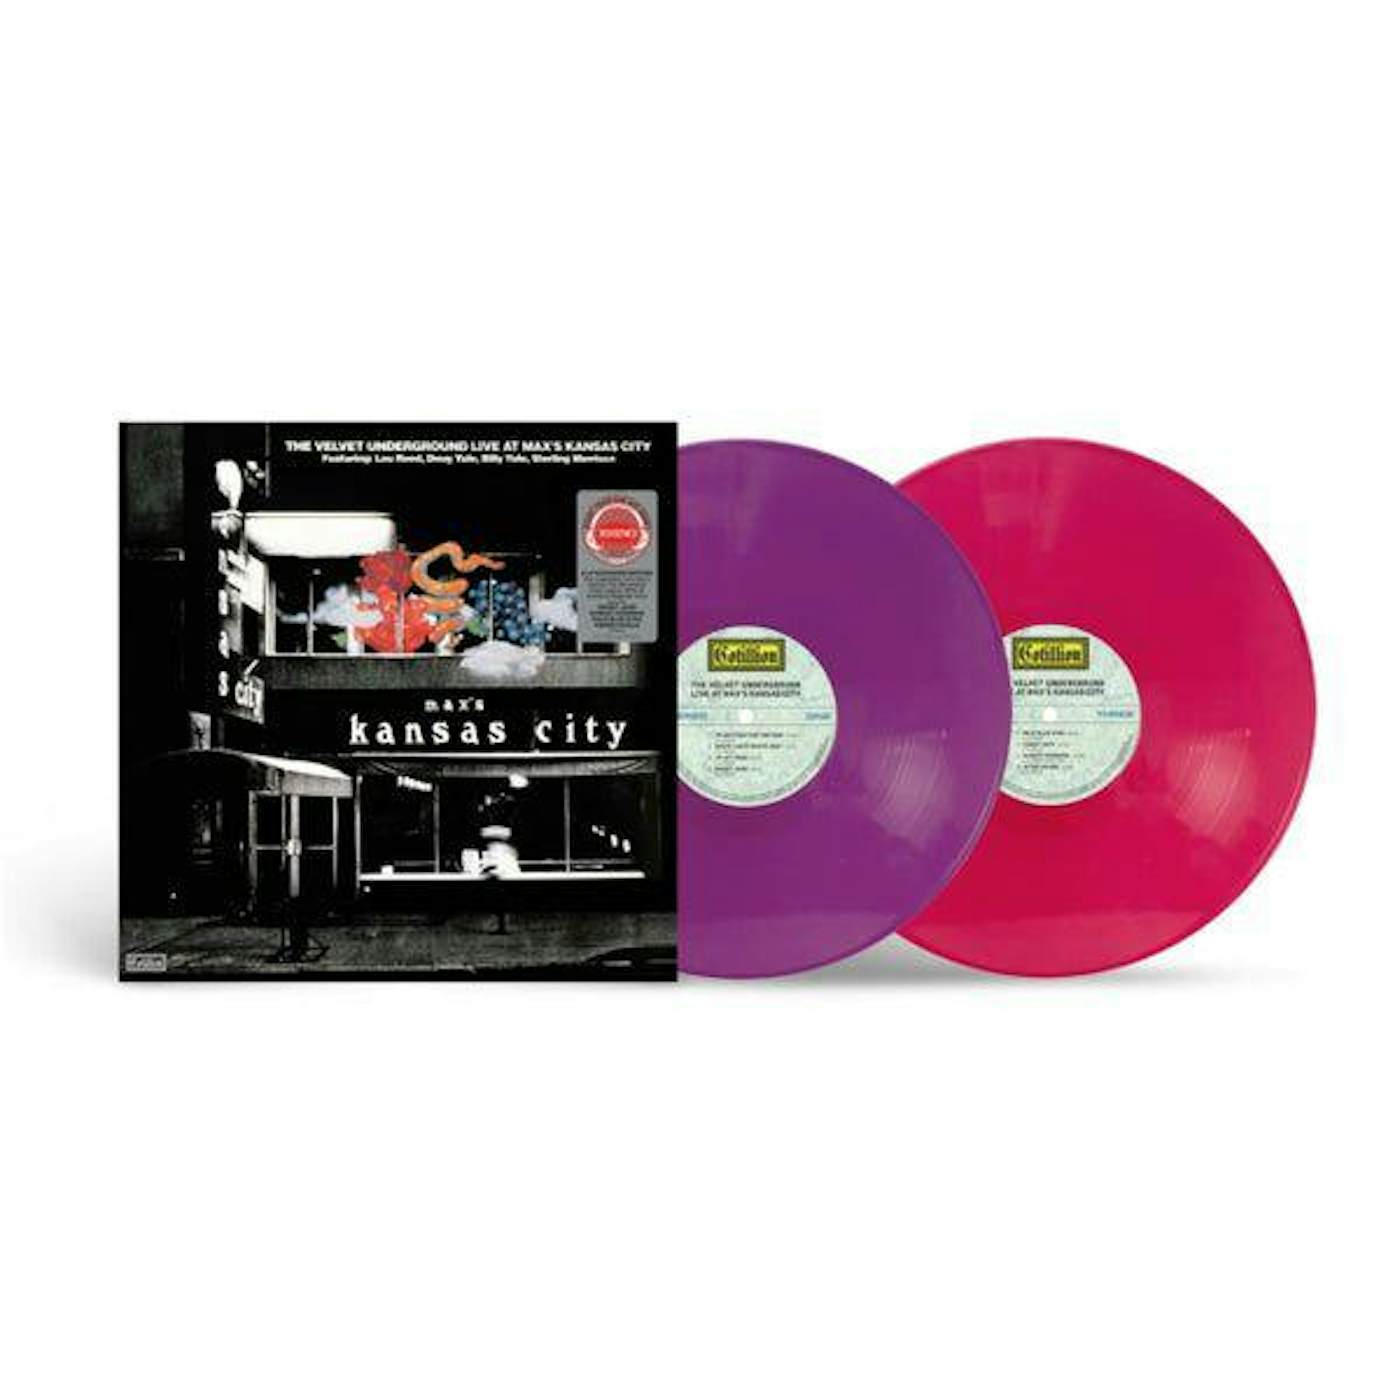 The Velvet Underground Live At Max's Kansas City: Expanded Version (Remastered/2LP) (Orchid & Magenta Vinyl) (Syeor) Vinyl Record